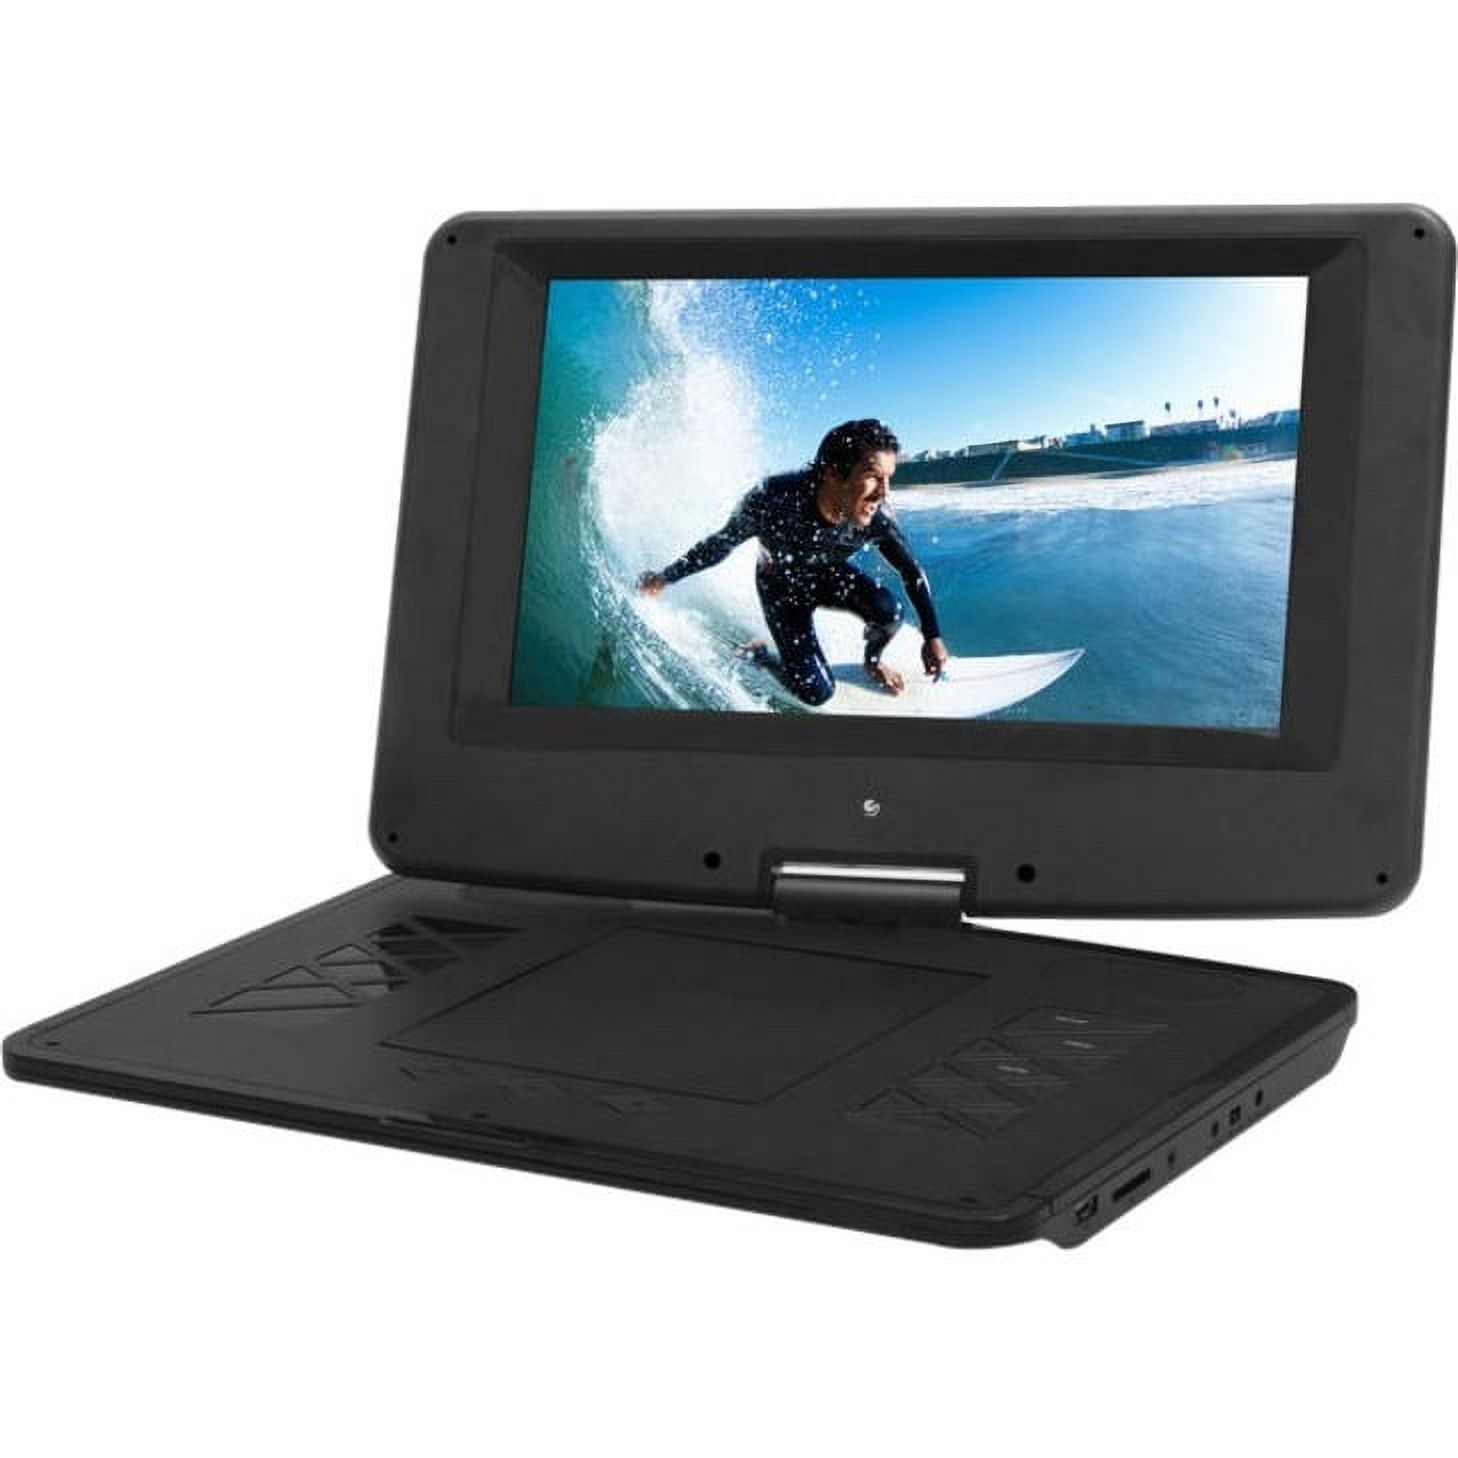 Ematic EPD133 Portable DVD Player, 13.3" Display, 1366 x 768, Black - image 2 of 3